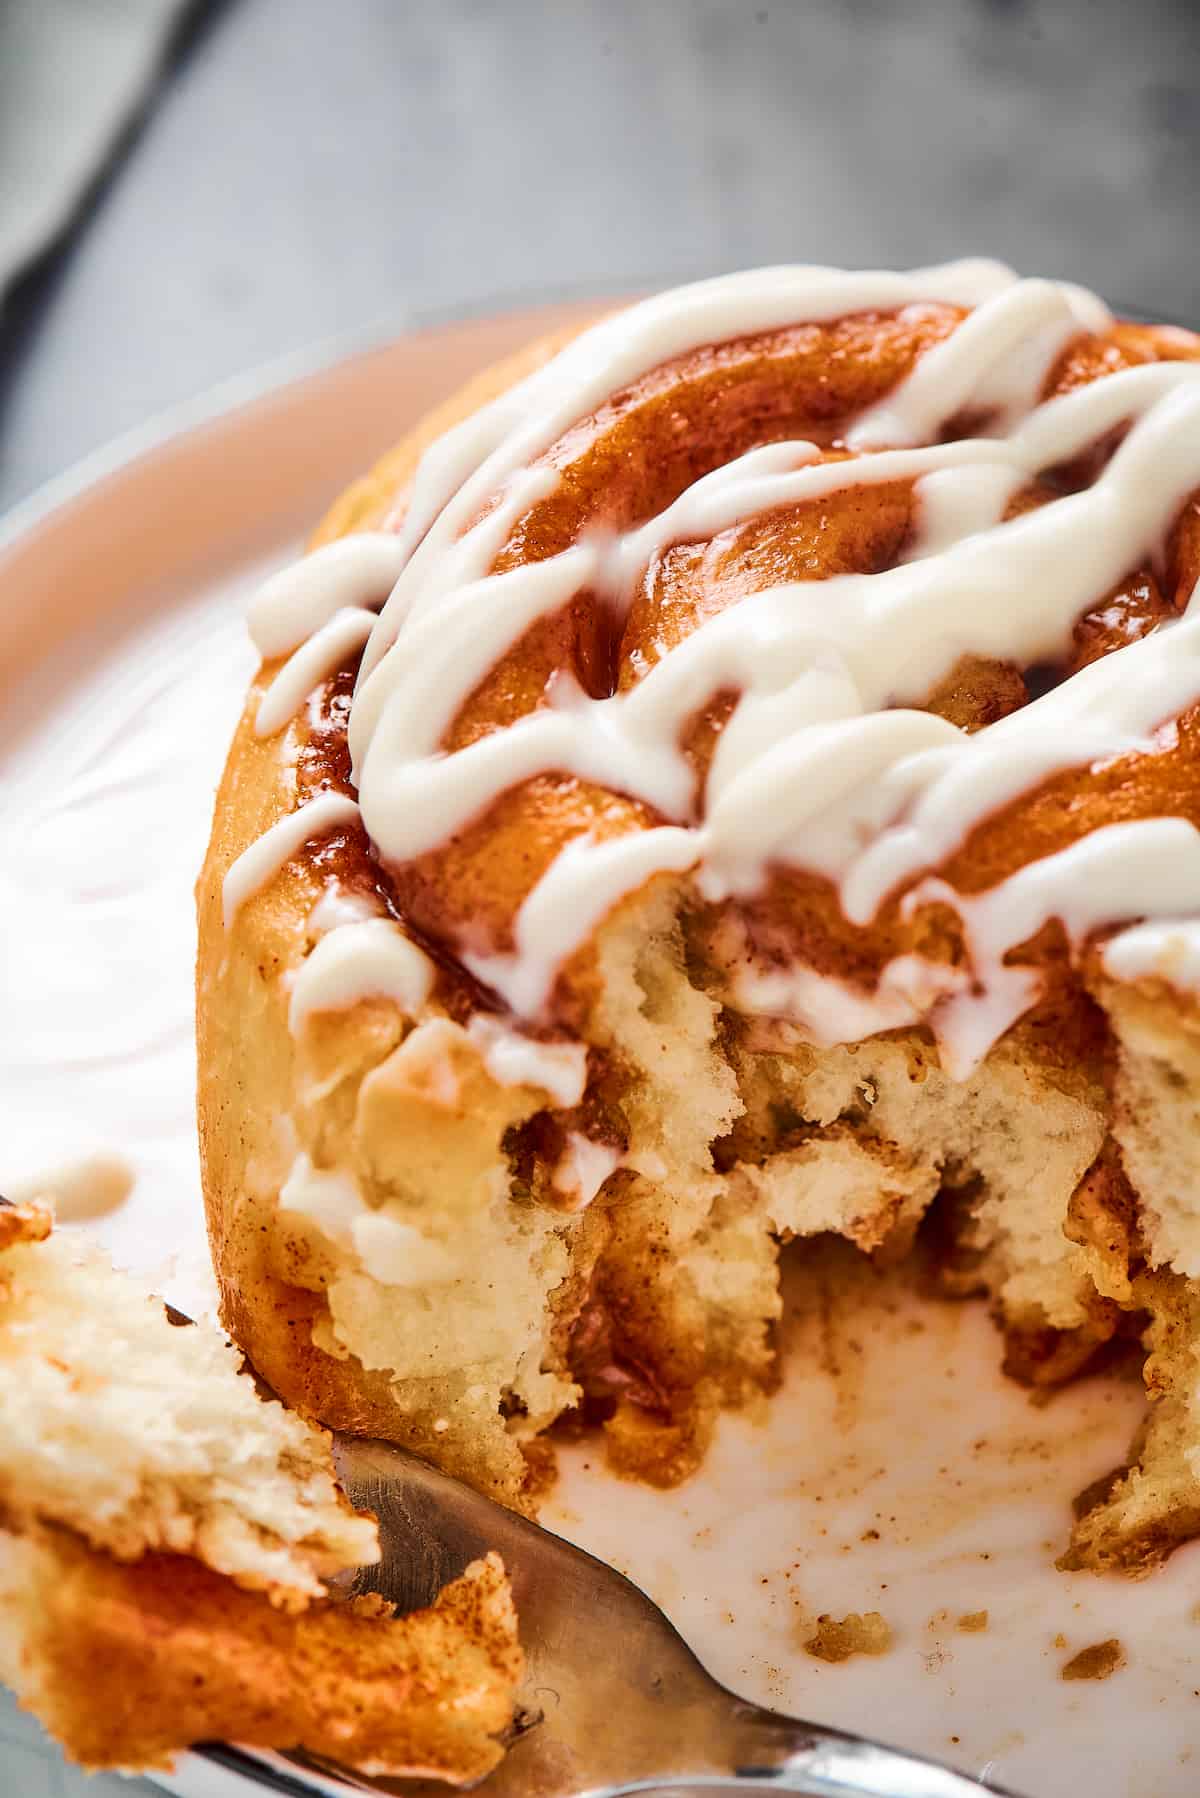 A fresh cinnamon roll with a bite taken from it, on a small plate.